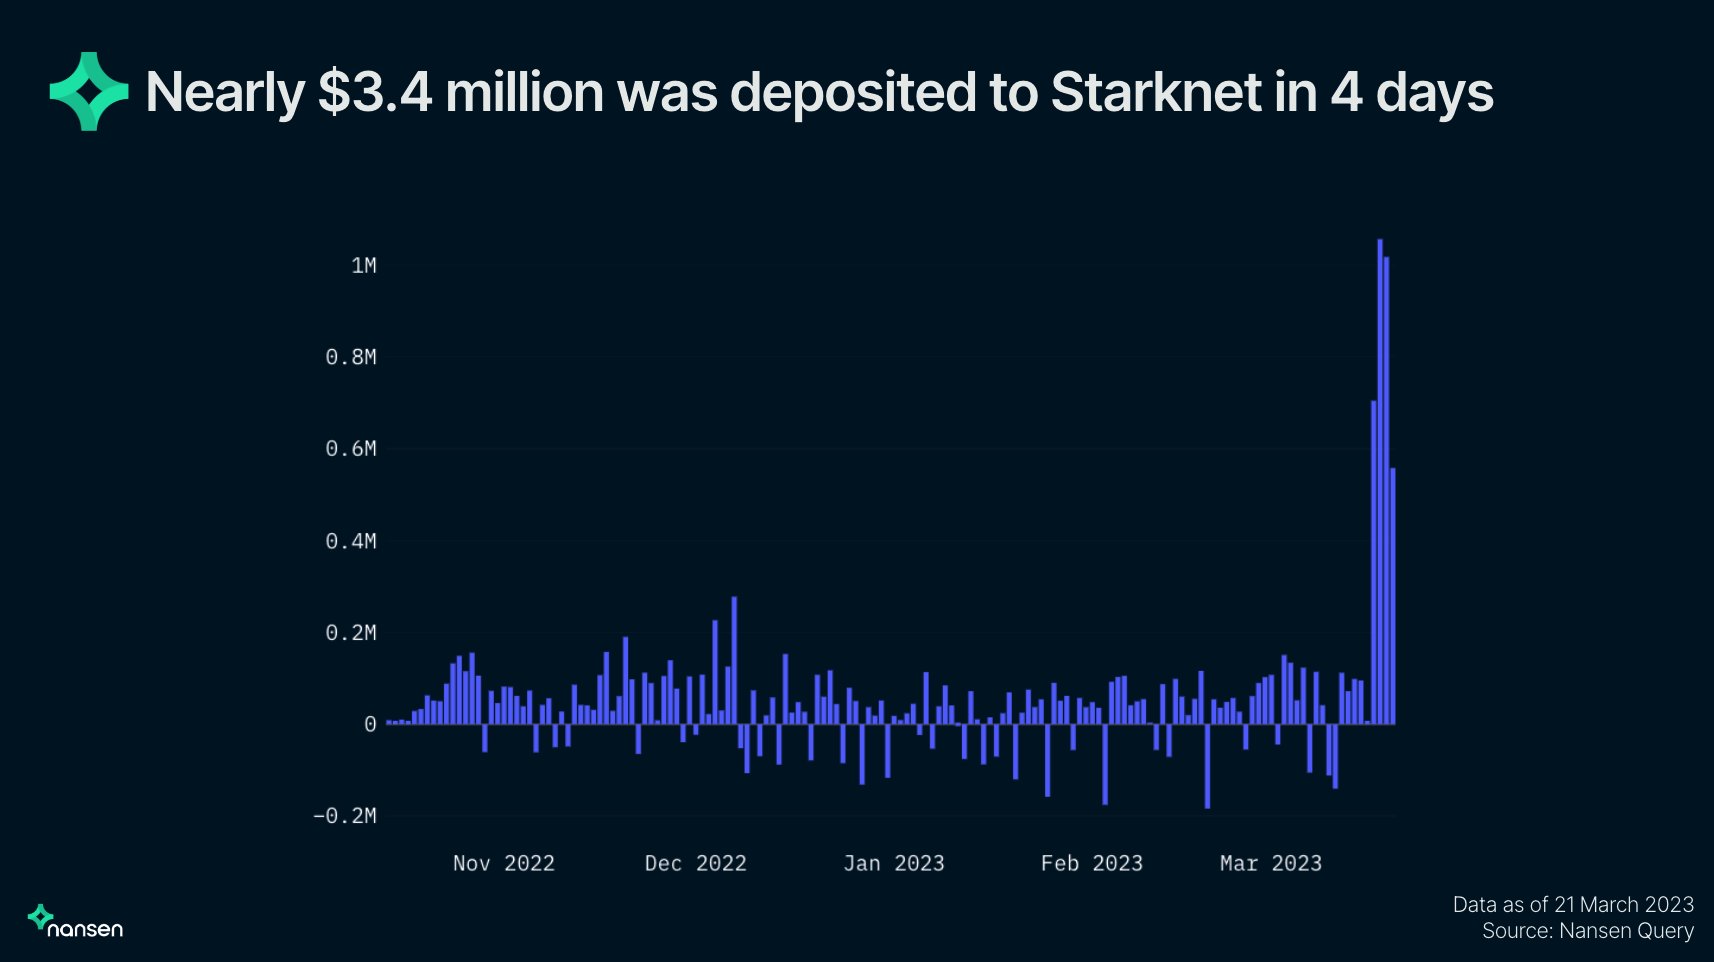 Daily inflows and outflows to and from Starknet.